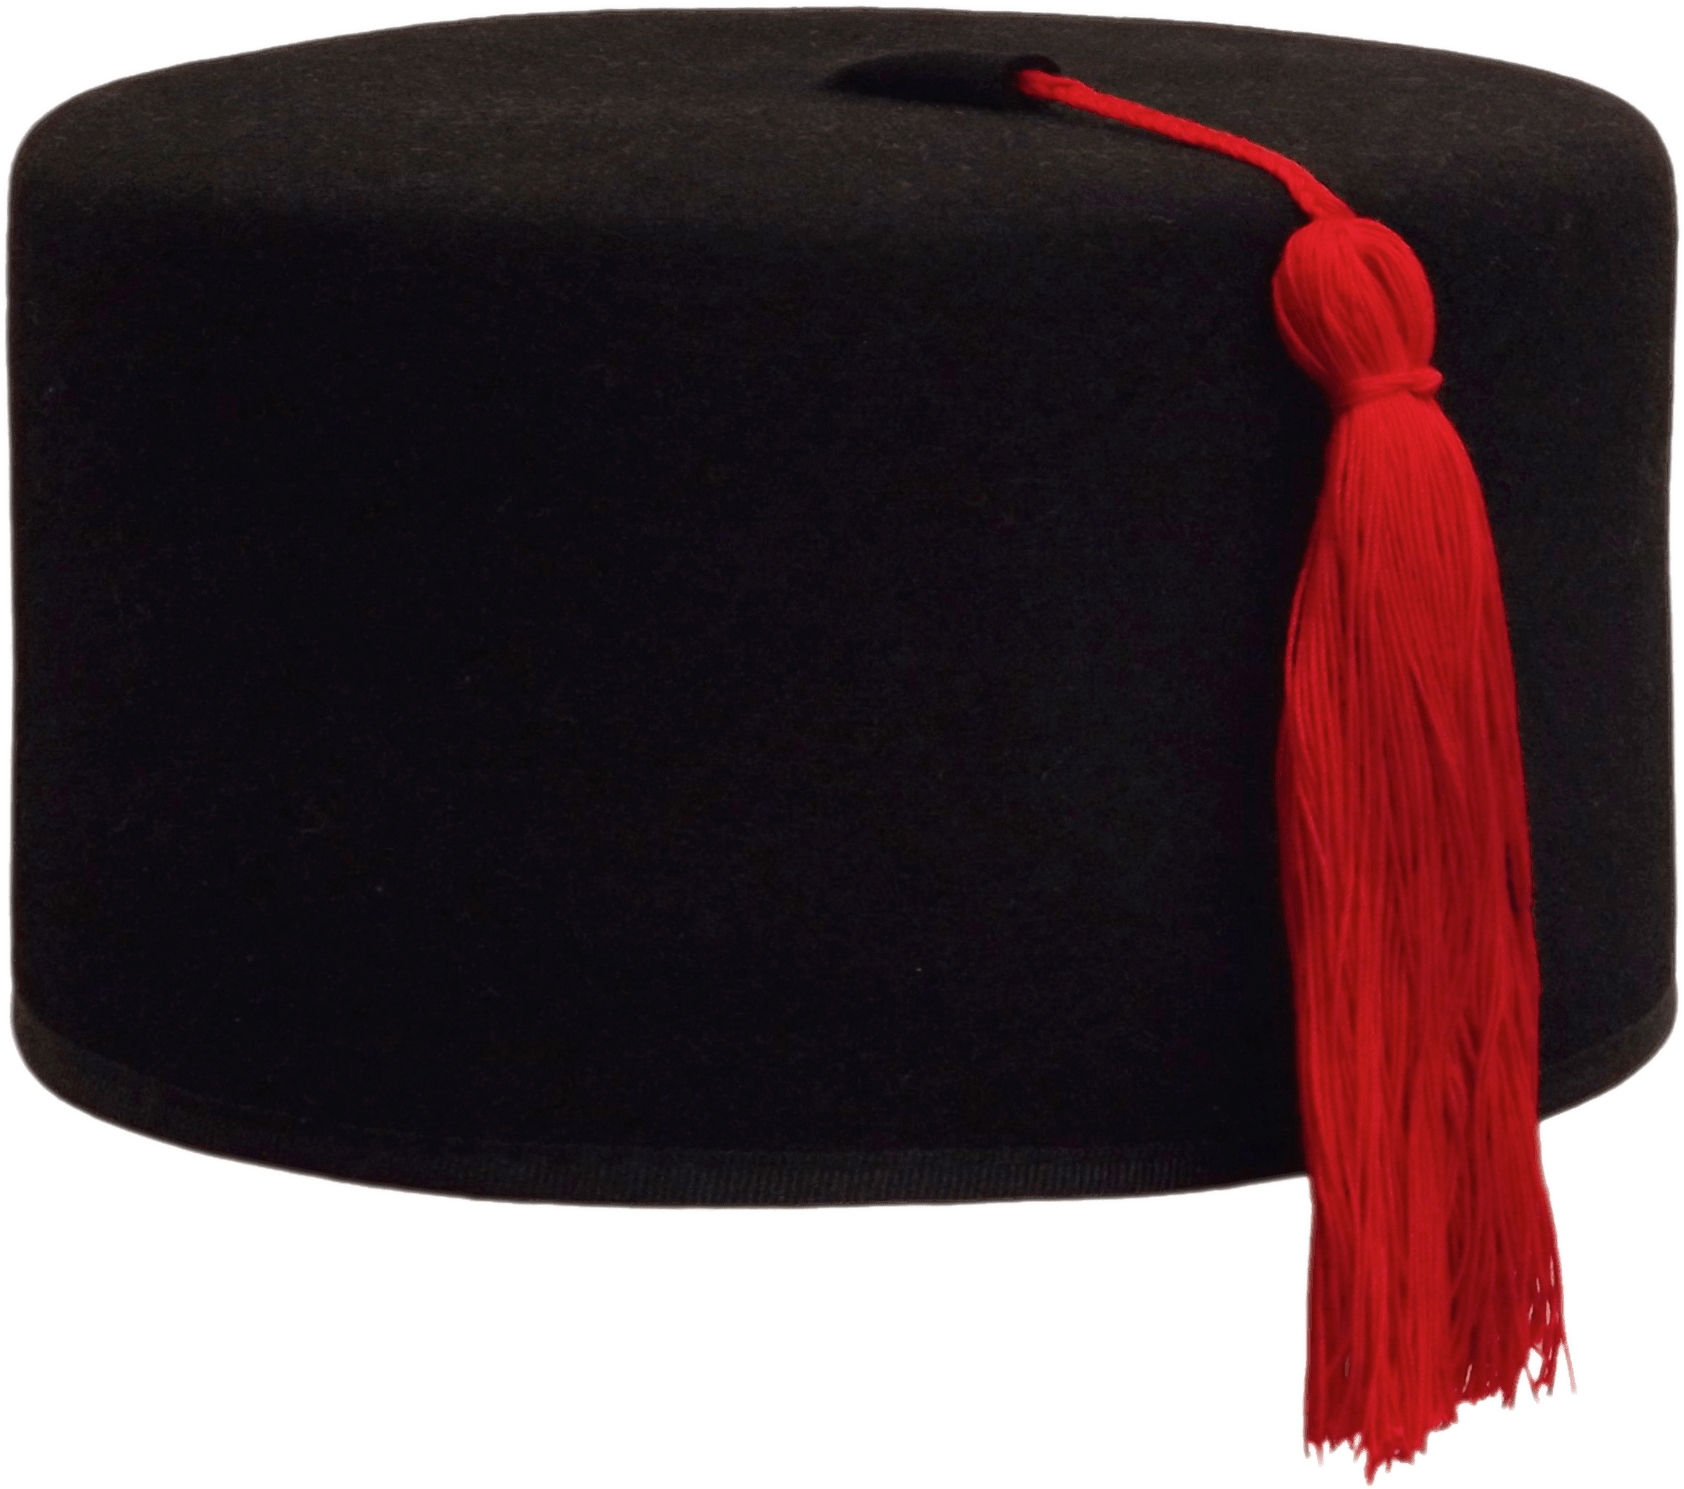 A Black Hat With A Red Tassel